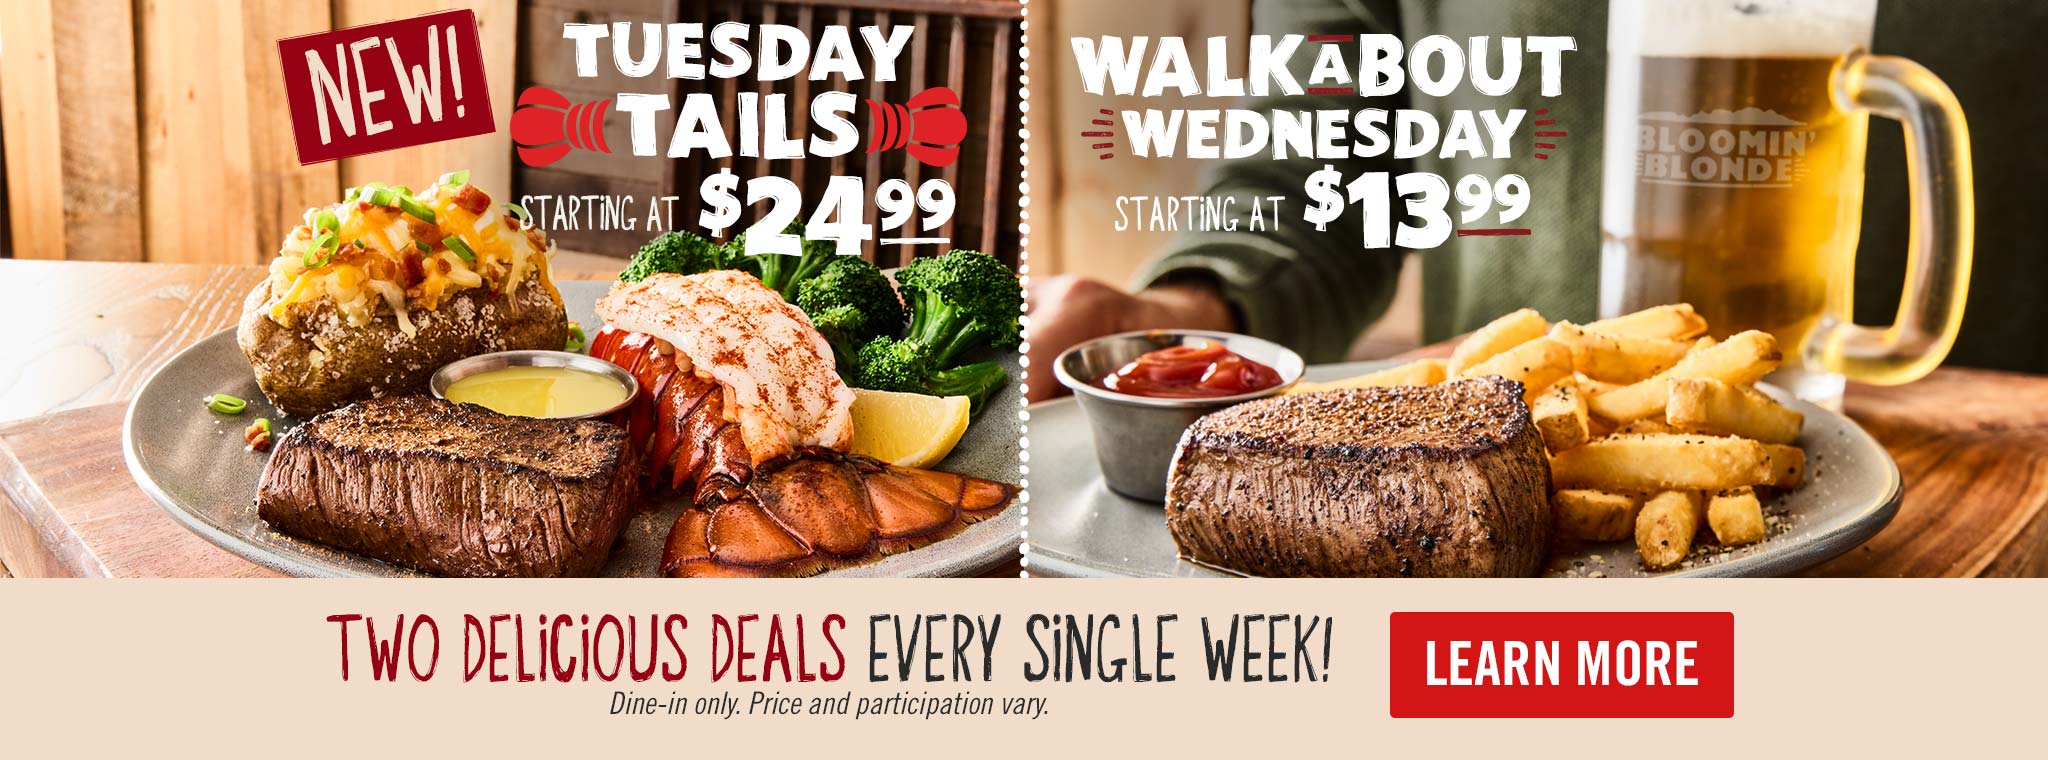 New Tuesday Tails And Walkabout Wednesday